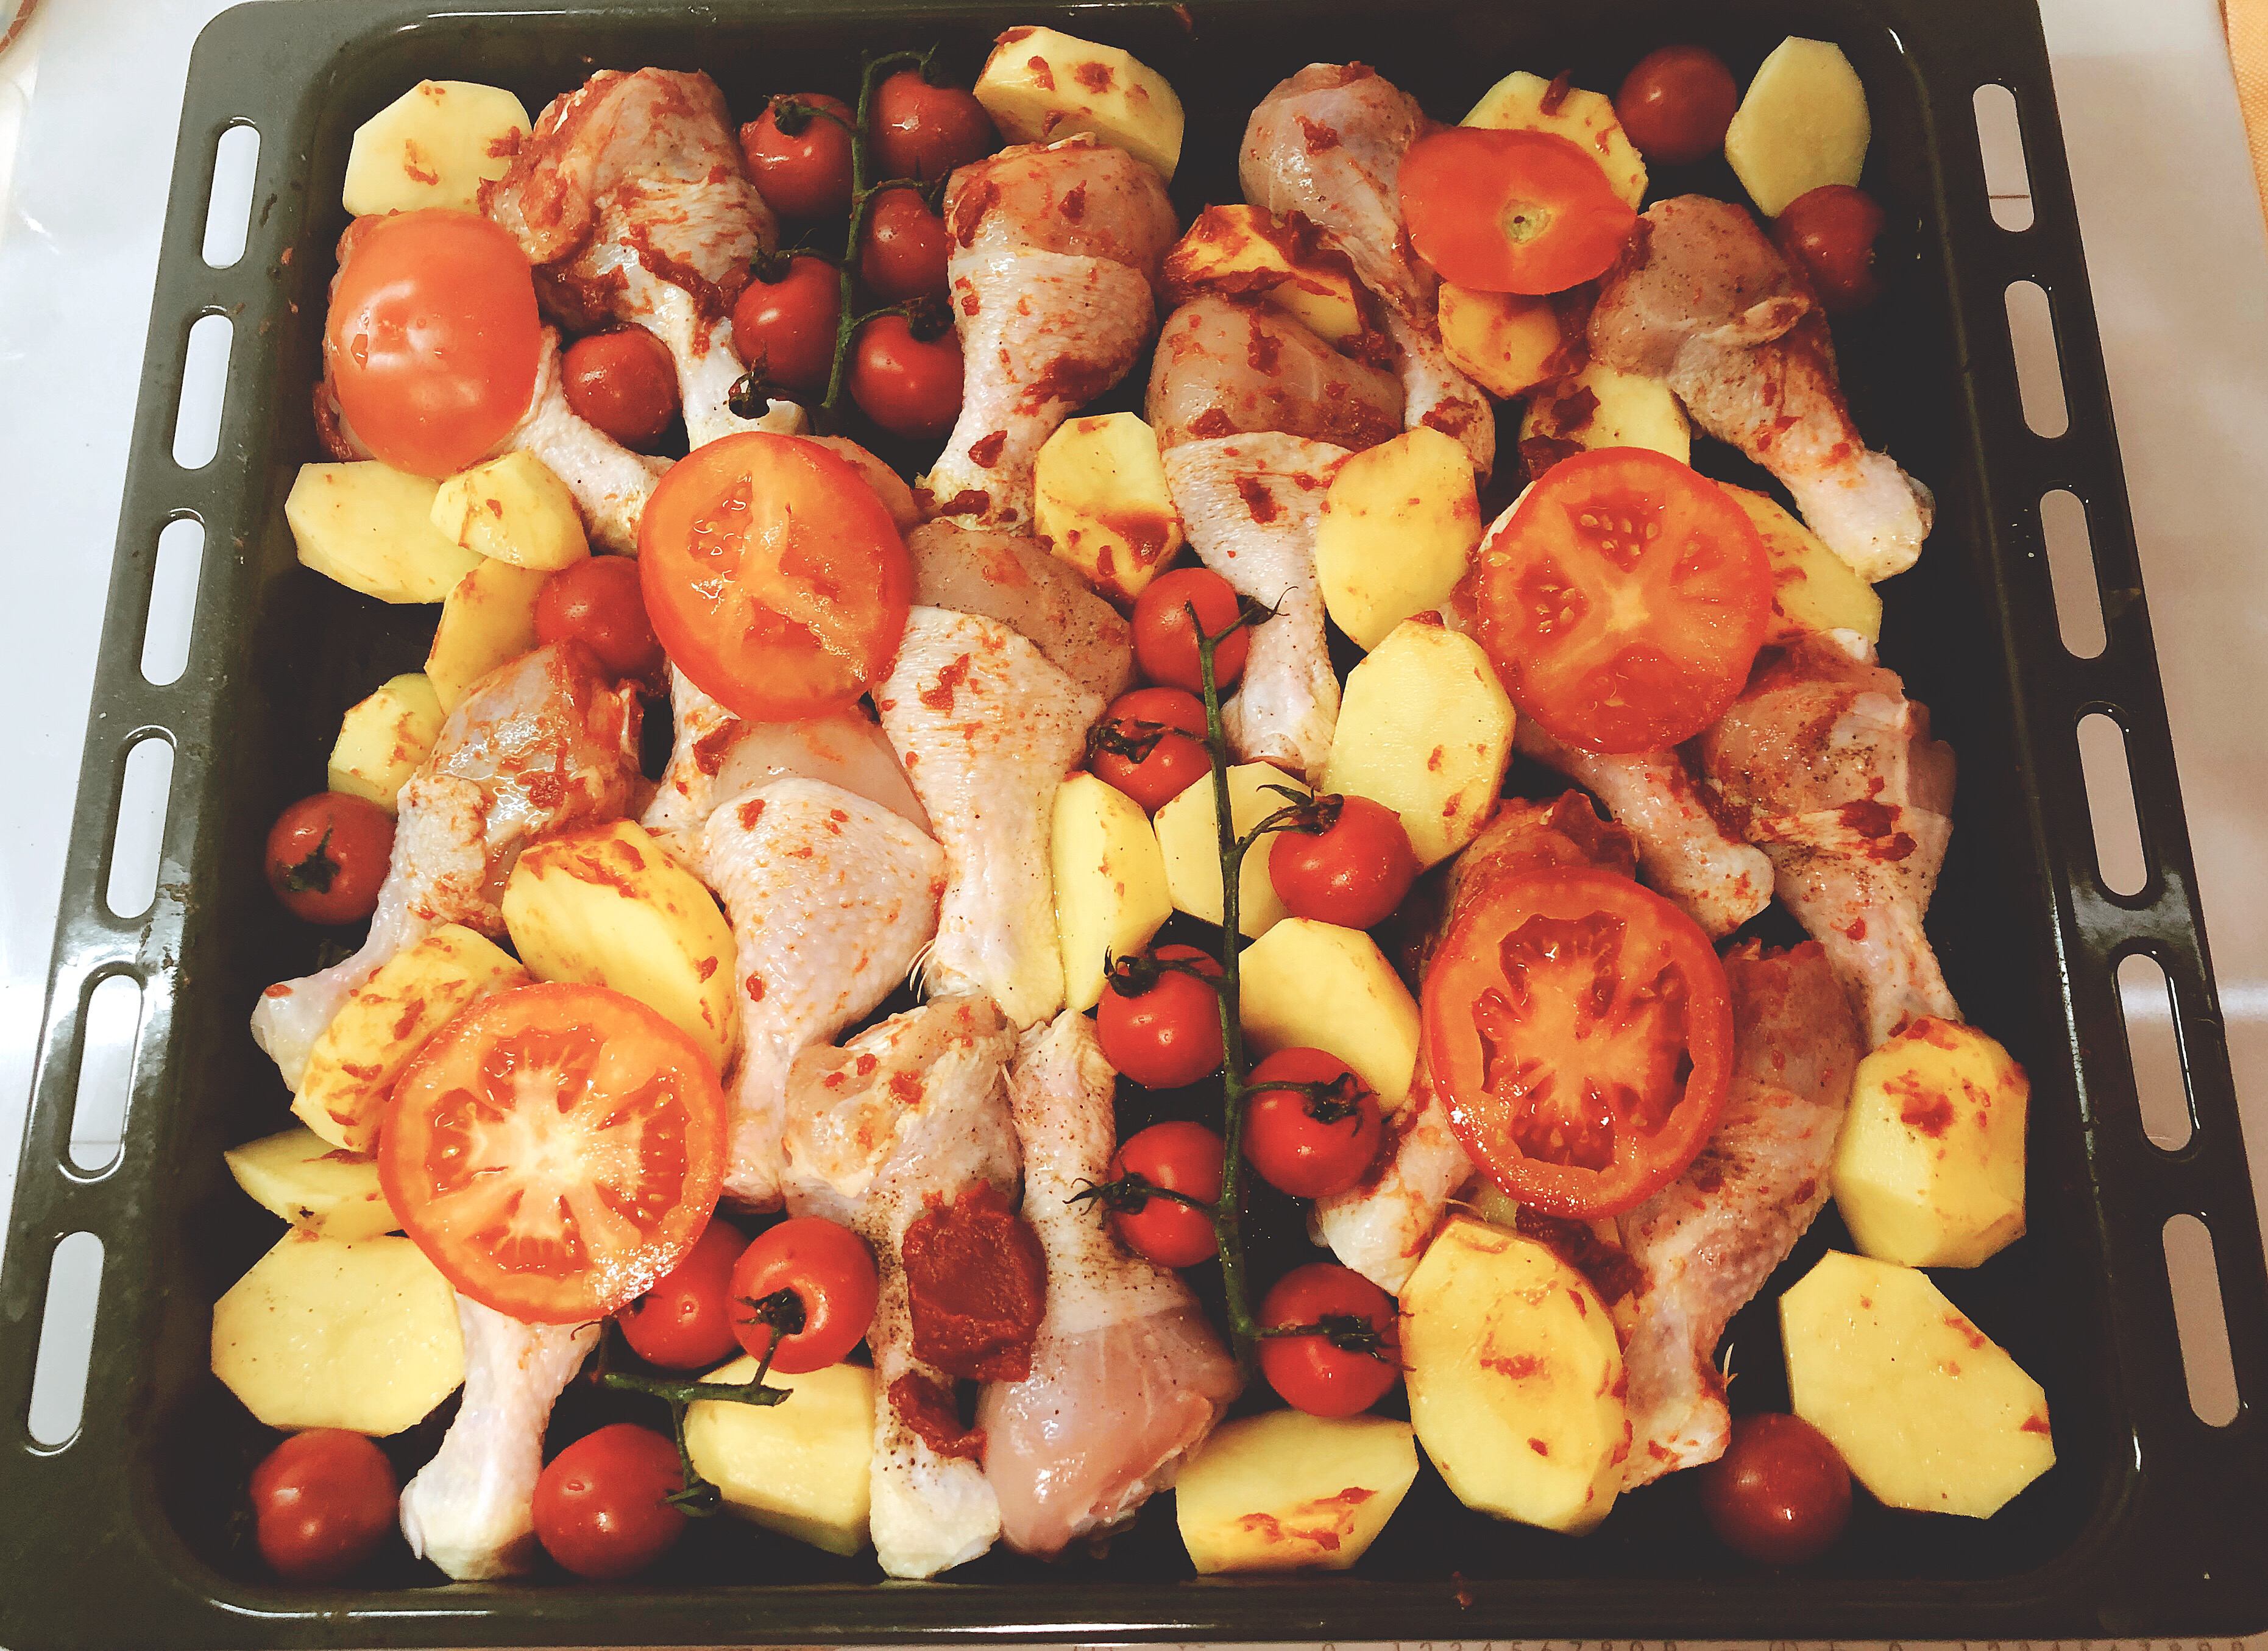 Chicken leg quarters with potatoes, tomatoes and bread